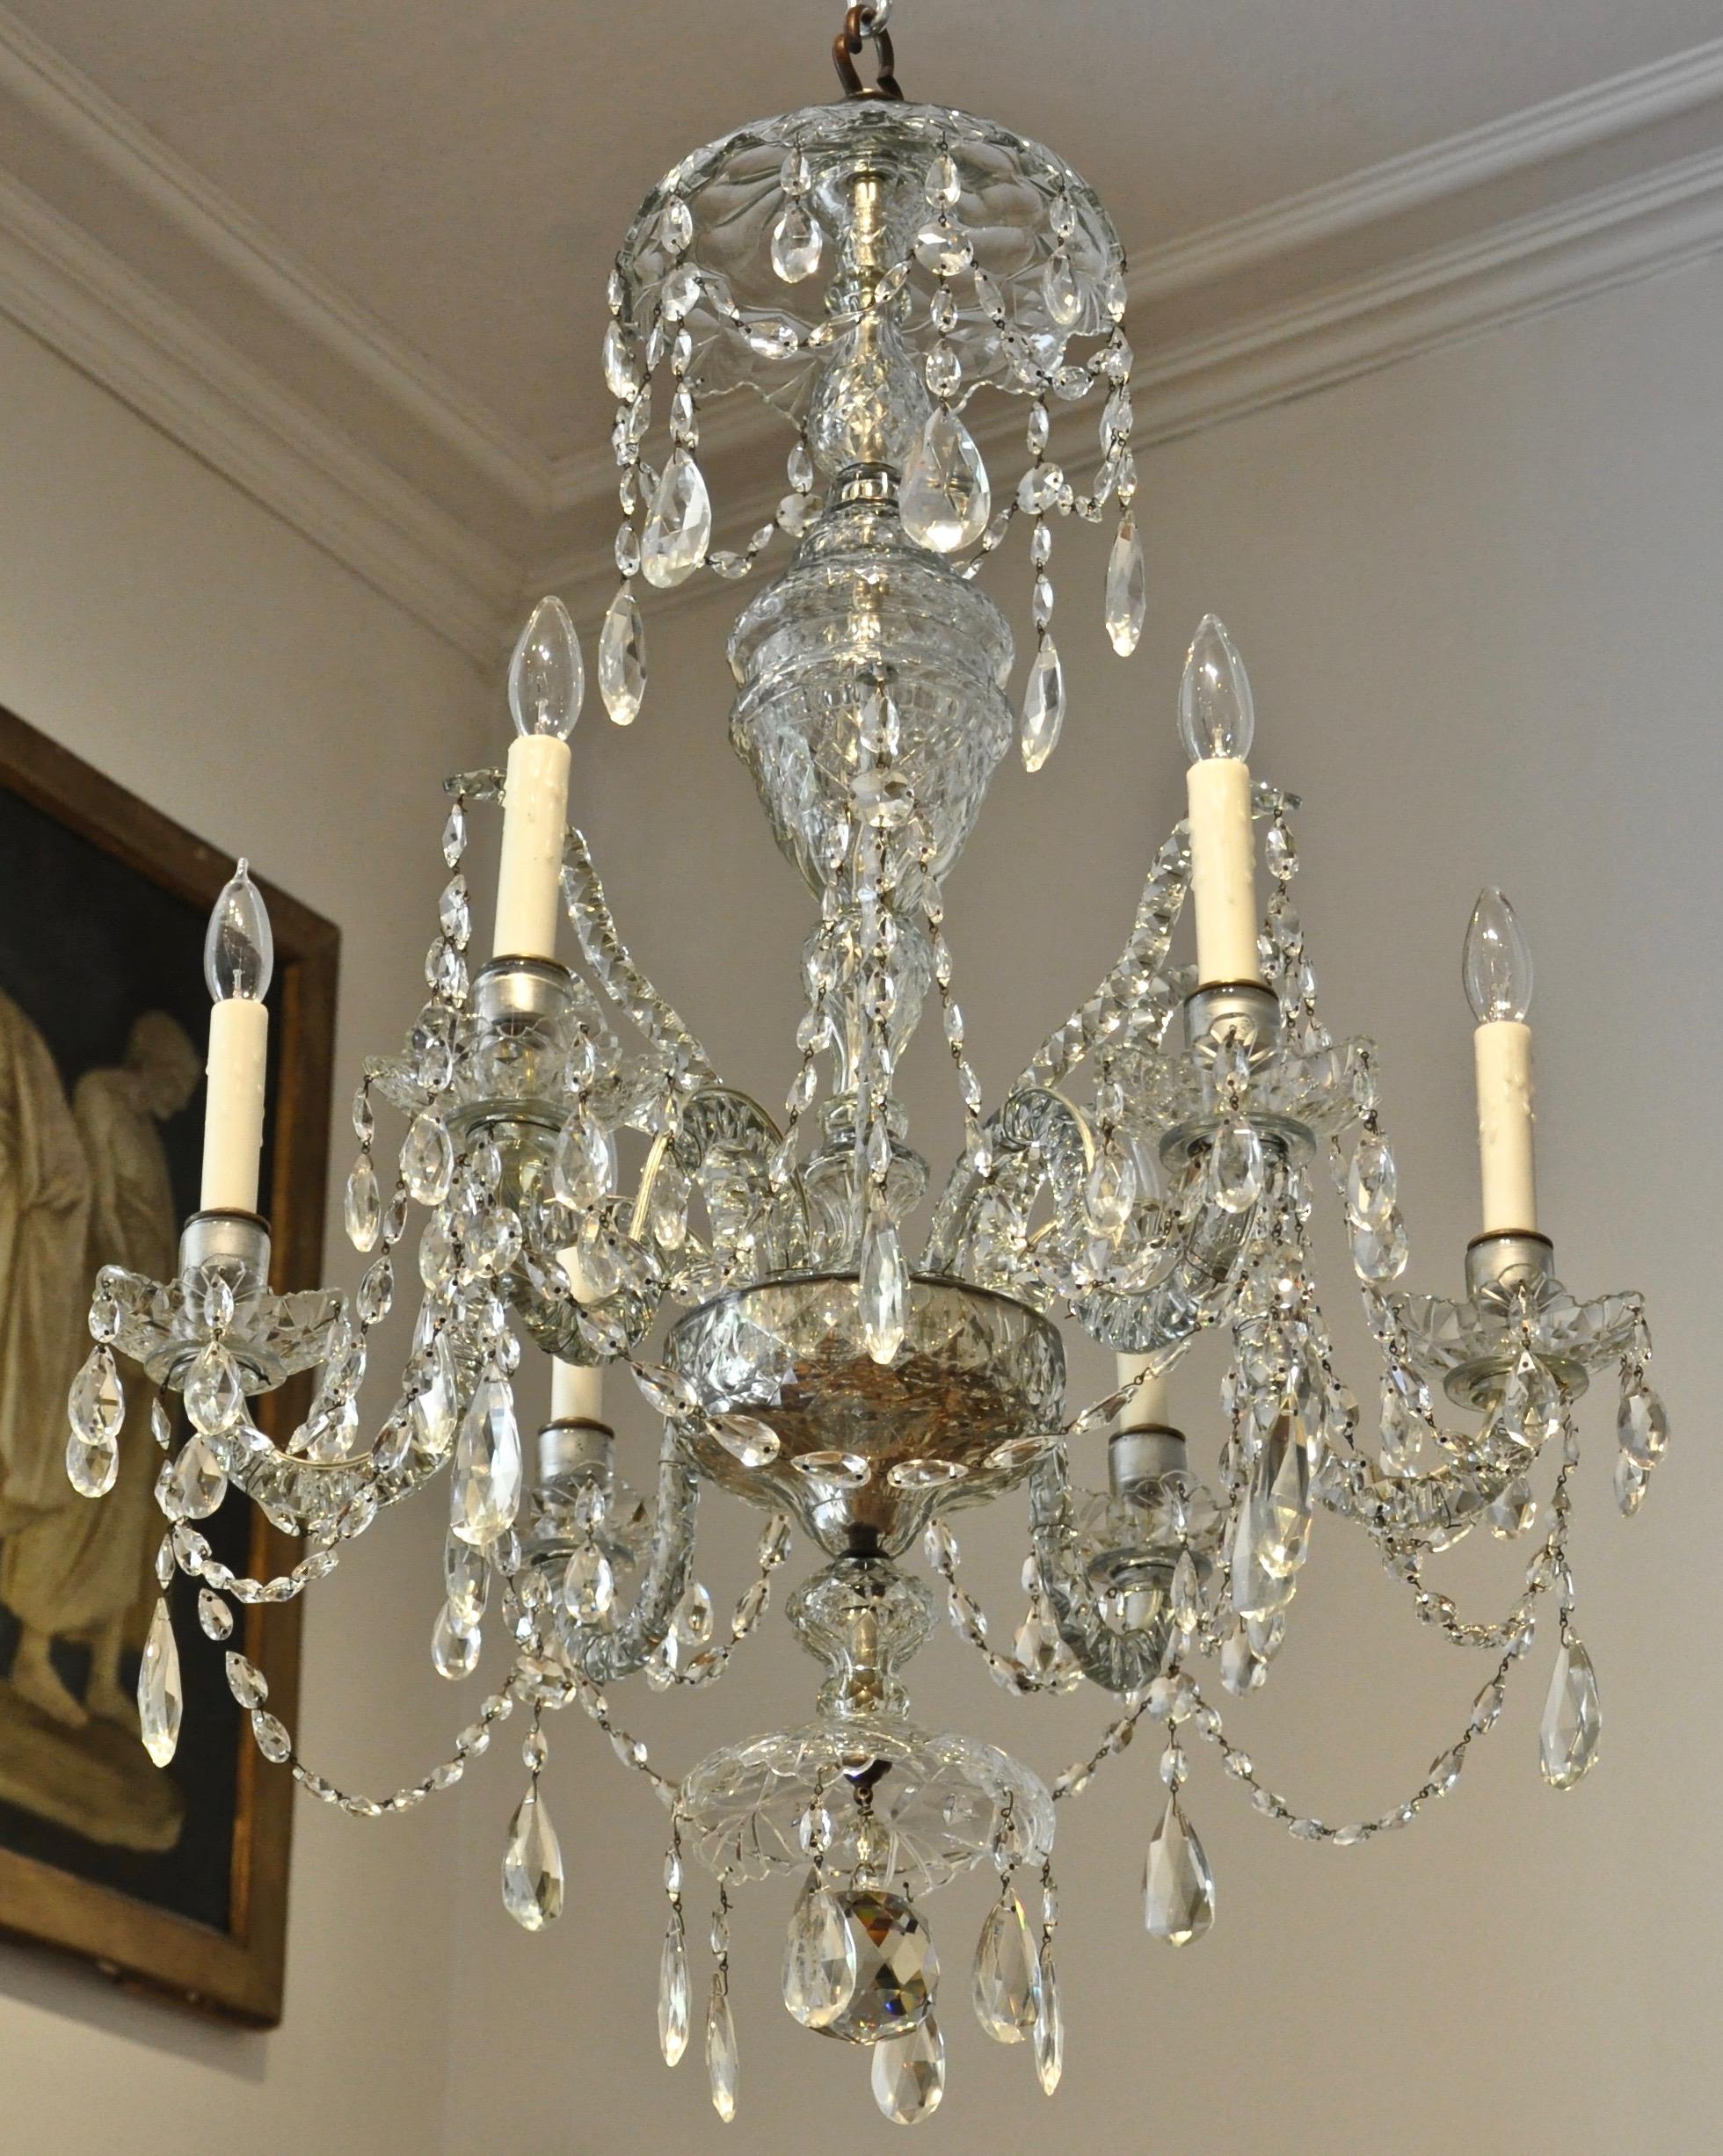 19th century English crystal chandelier of Georgian neoclassical style

--Six-arm French wired handcut crystal chandelier with swan neck upward arms and original cut crystal bobeches.
--Original throughout and in excellent condition 
--Georgian